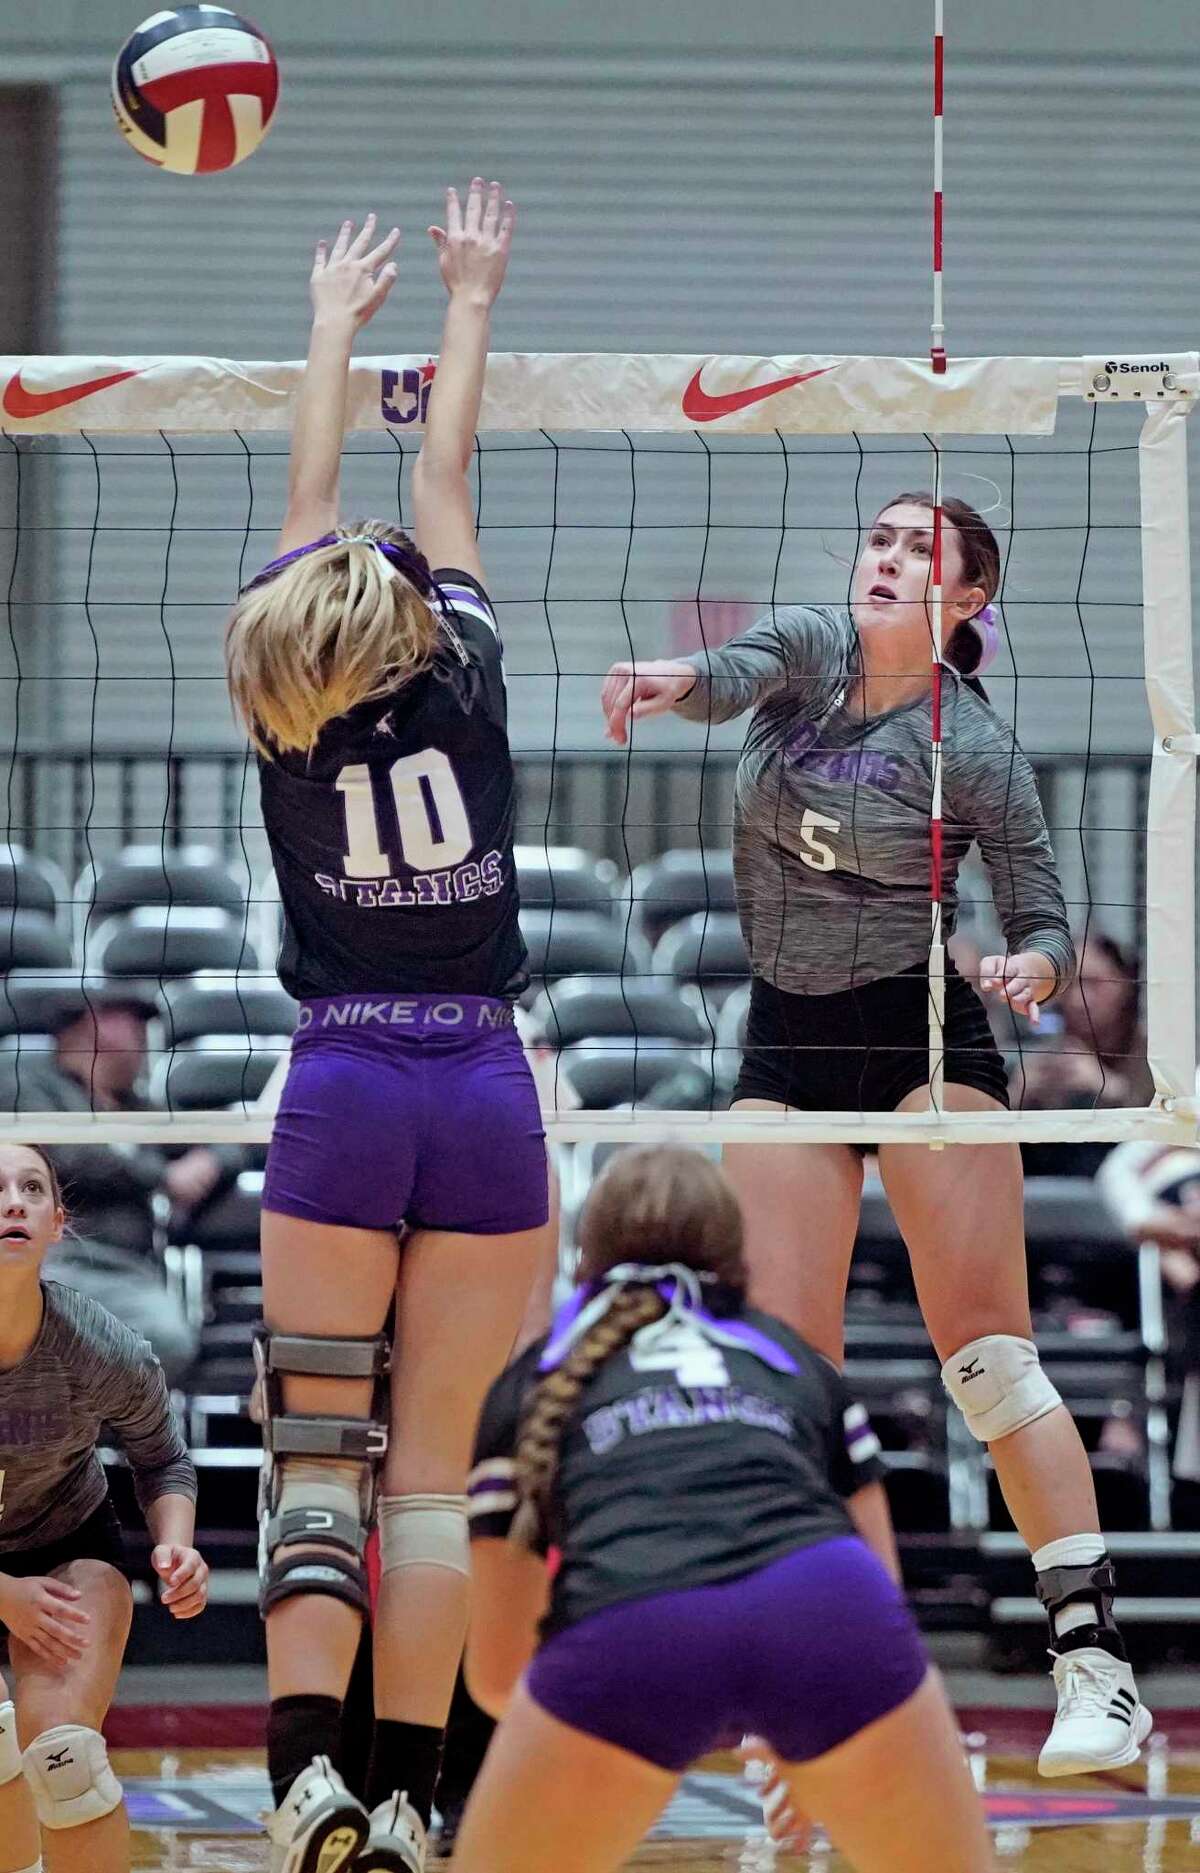 D’Hanis High School’s Kylee Thompson hits a shot at the net as Benjamin High School’s Kamryn Jones (10) defends in their state semifinal volleyball match on Wednesday, November 16, 2022 at the Curtis Culwell Center in Garland, Texas. CREDIT: Louis DeLuca for the San Antonio Express News